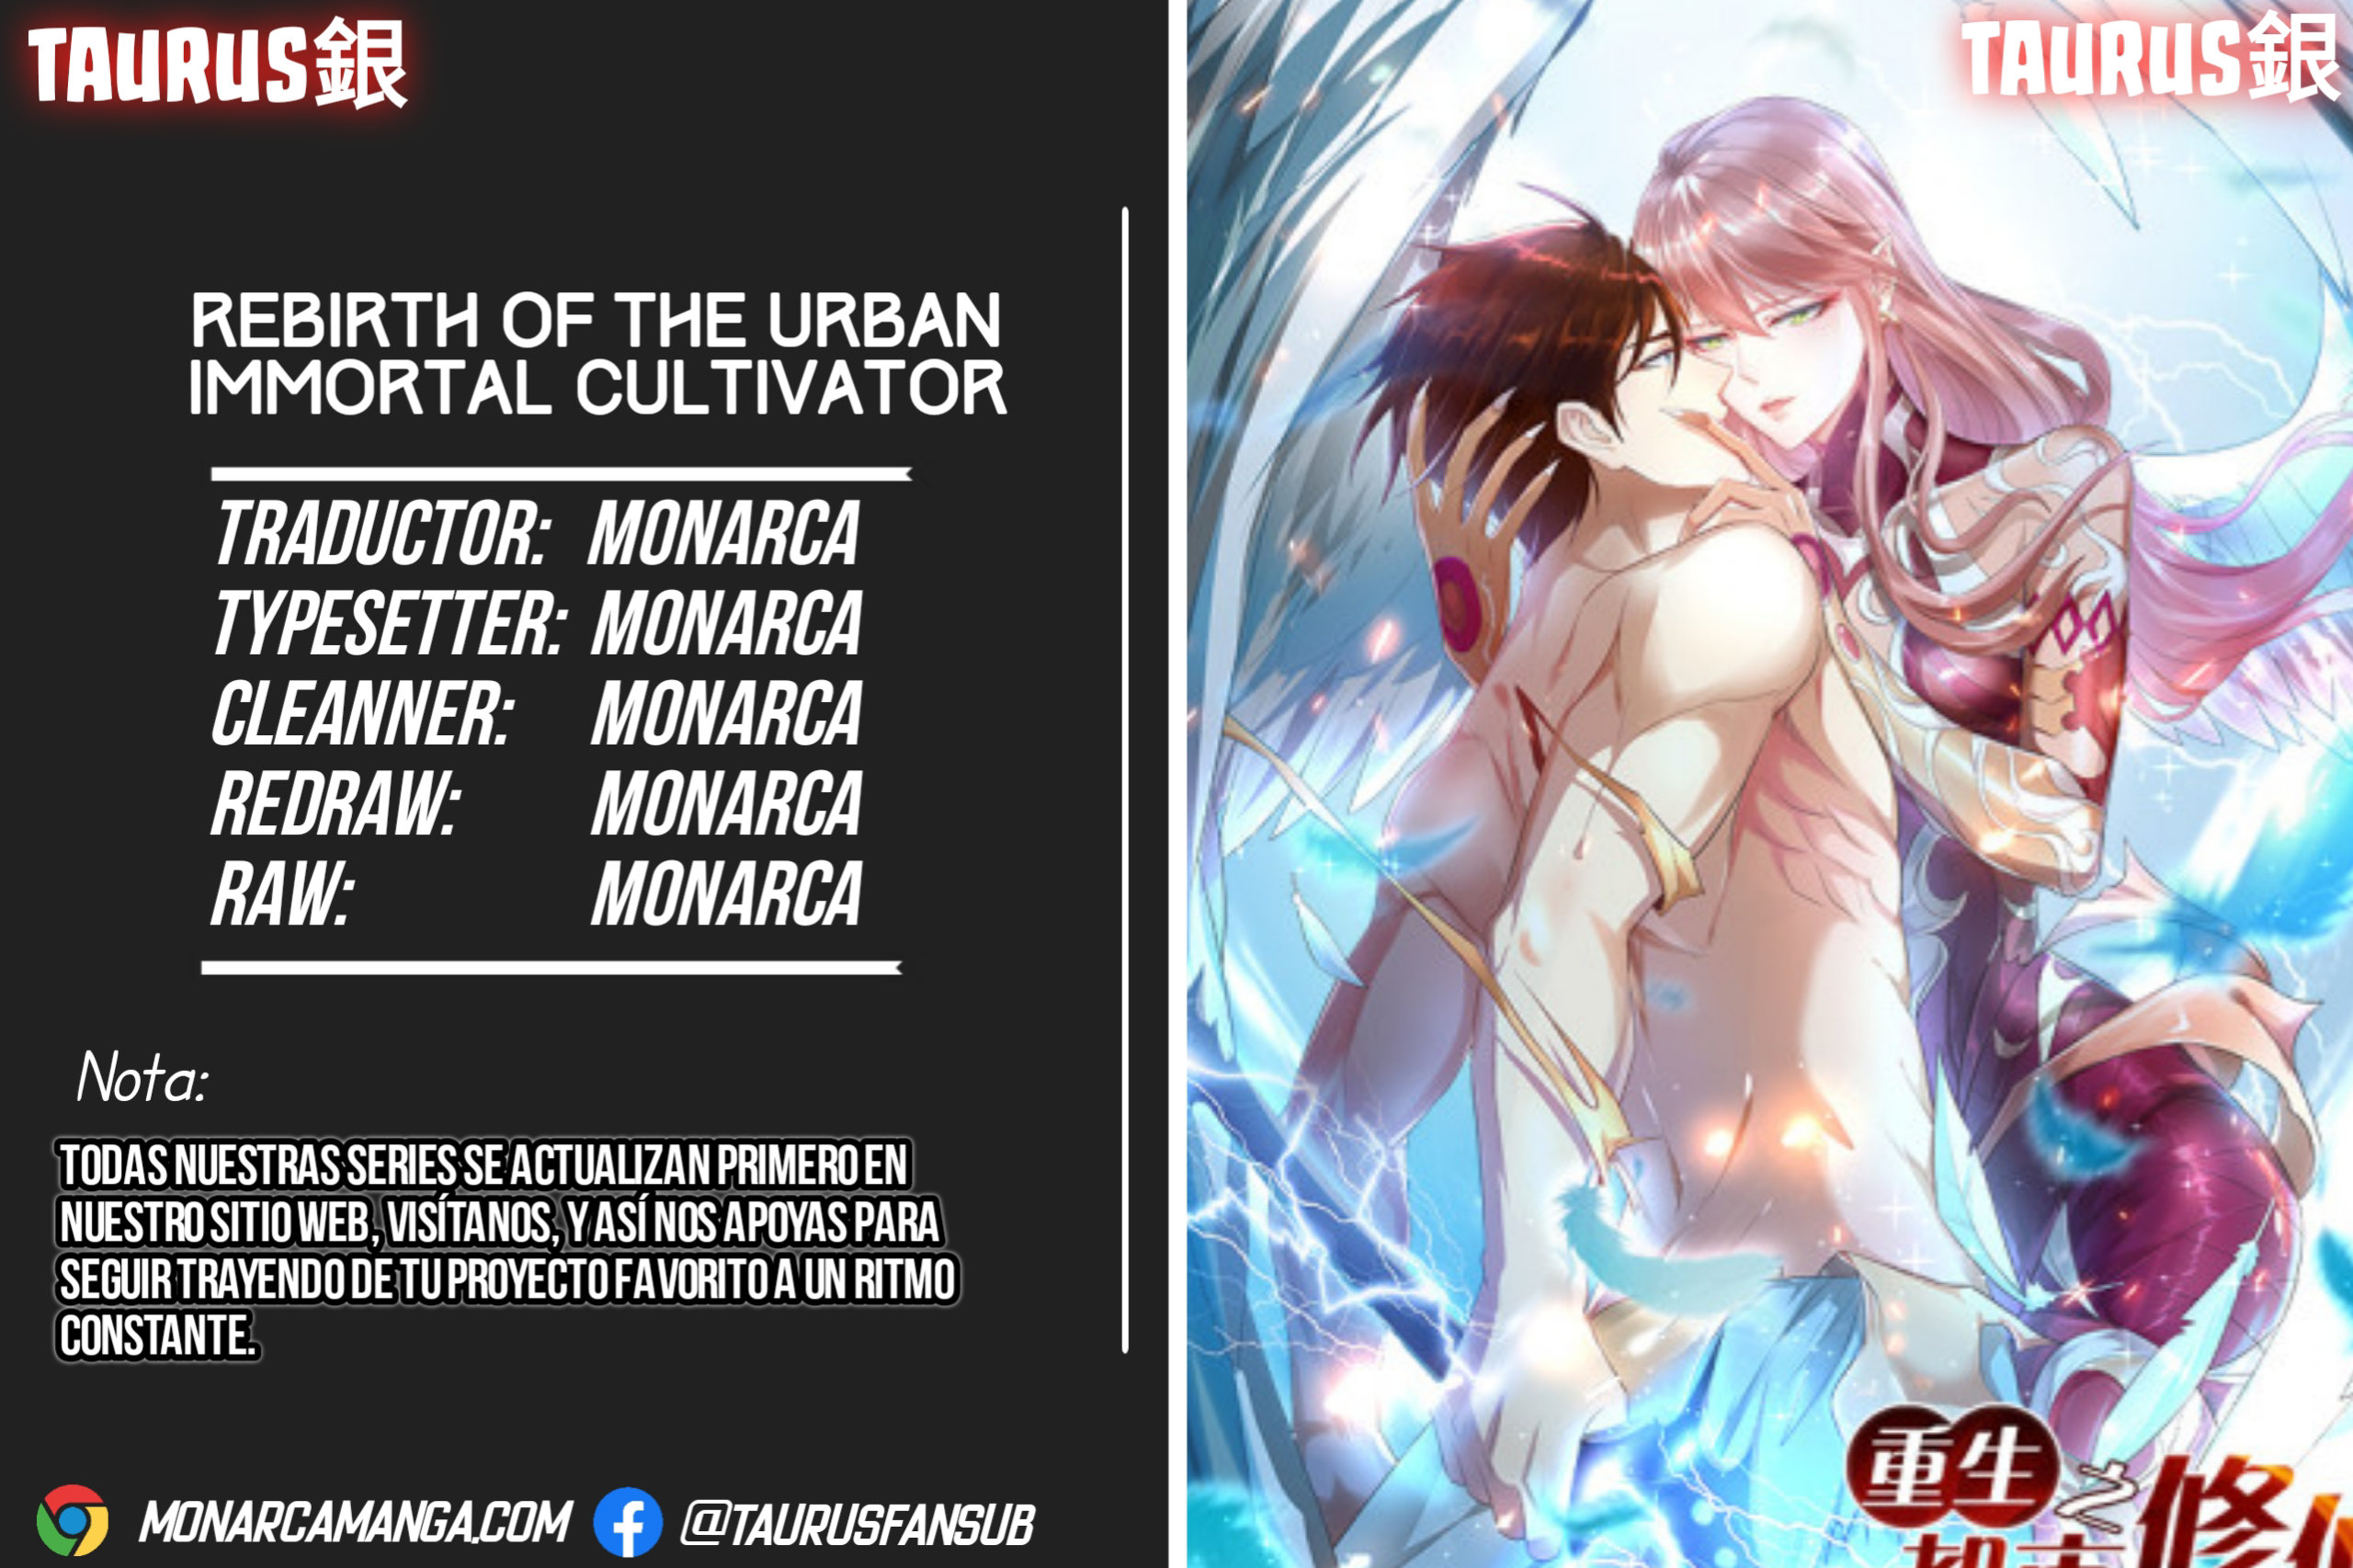 Manga Rebirth Of The Urban Immortal Cultivator Chapter 691 image number 9